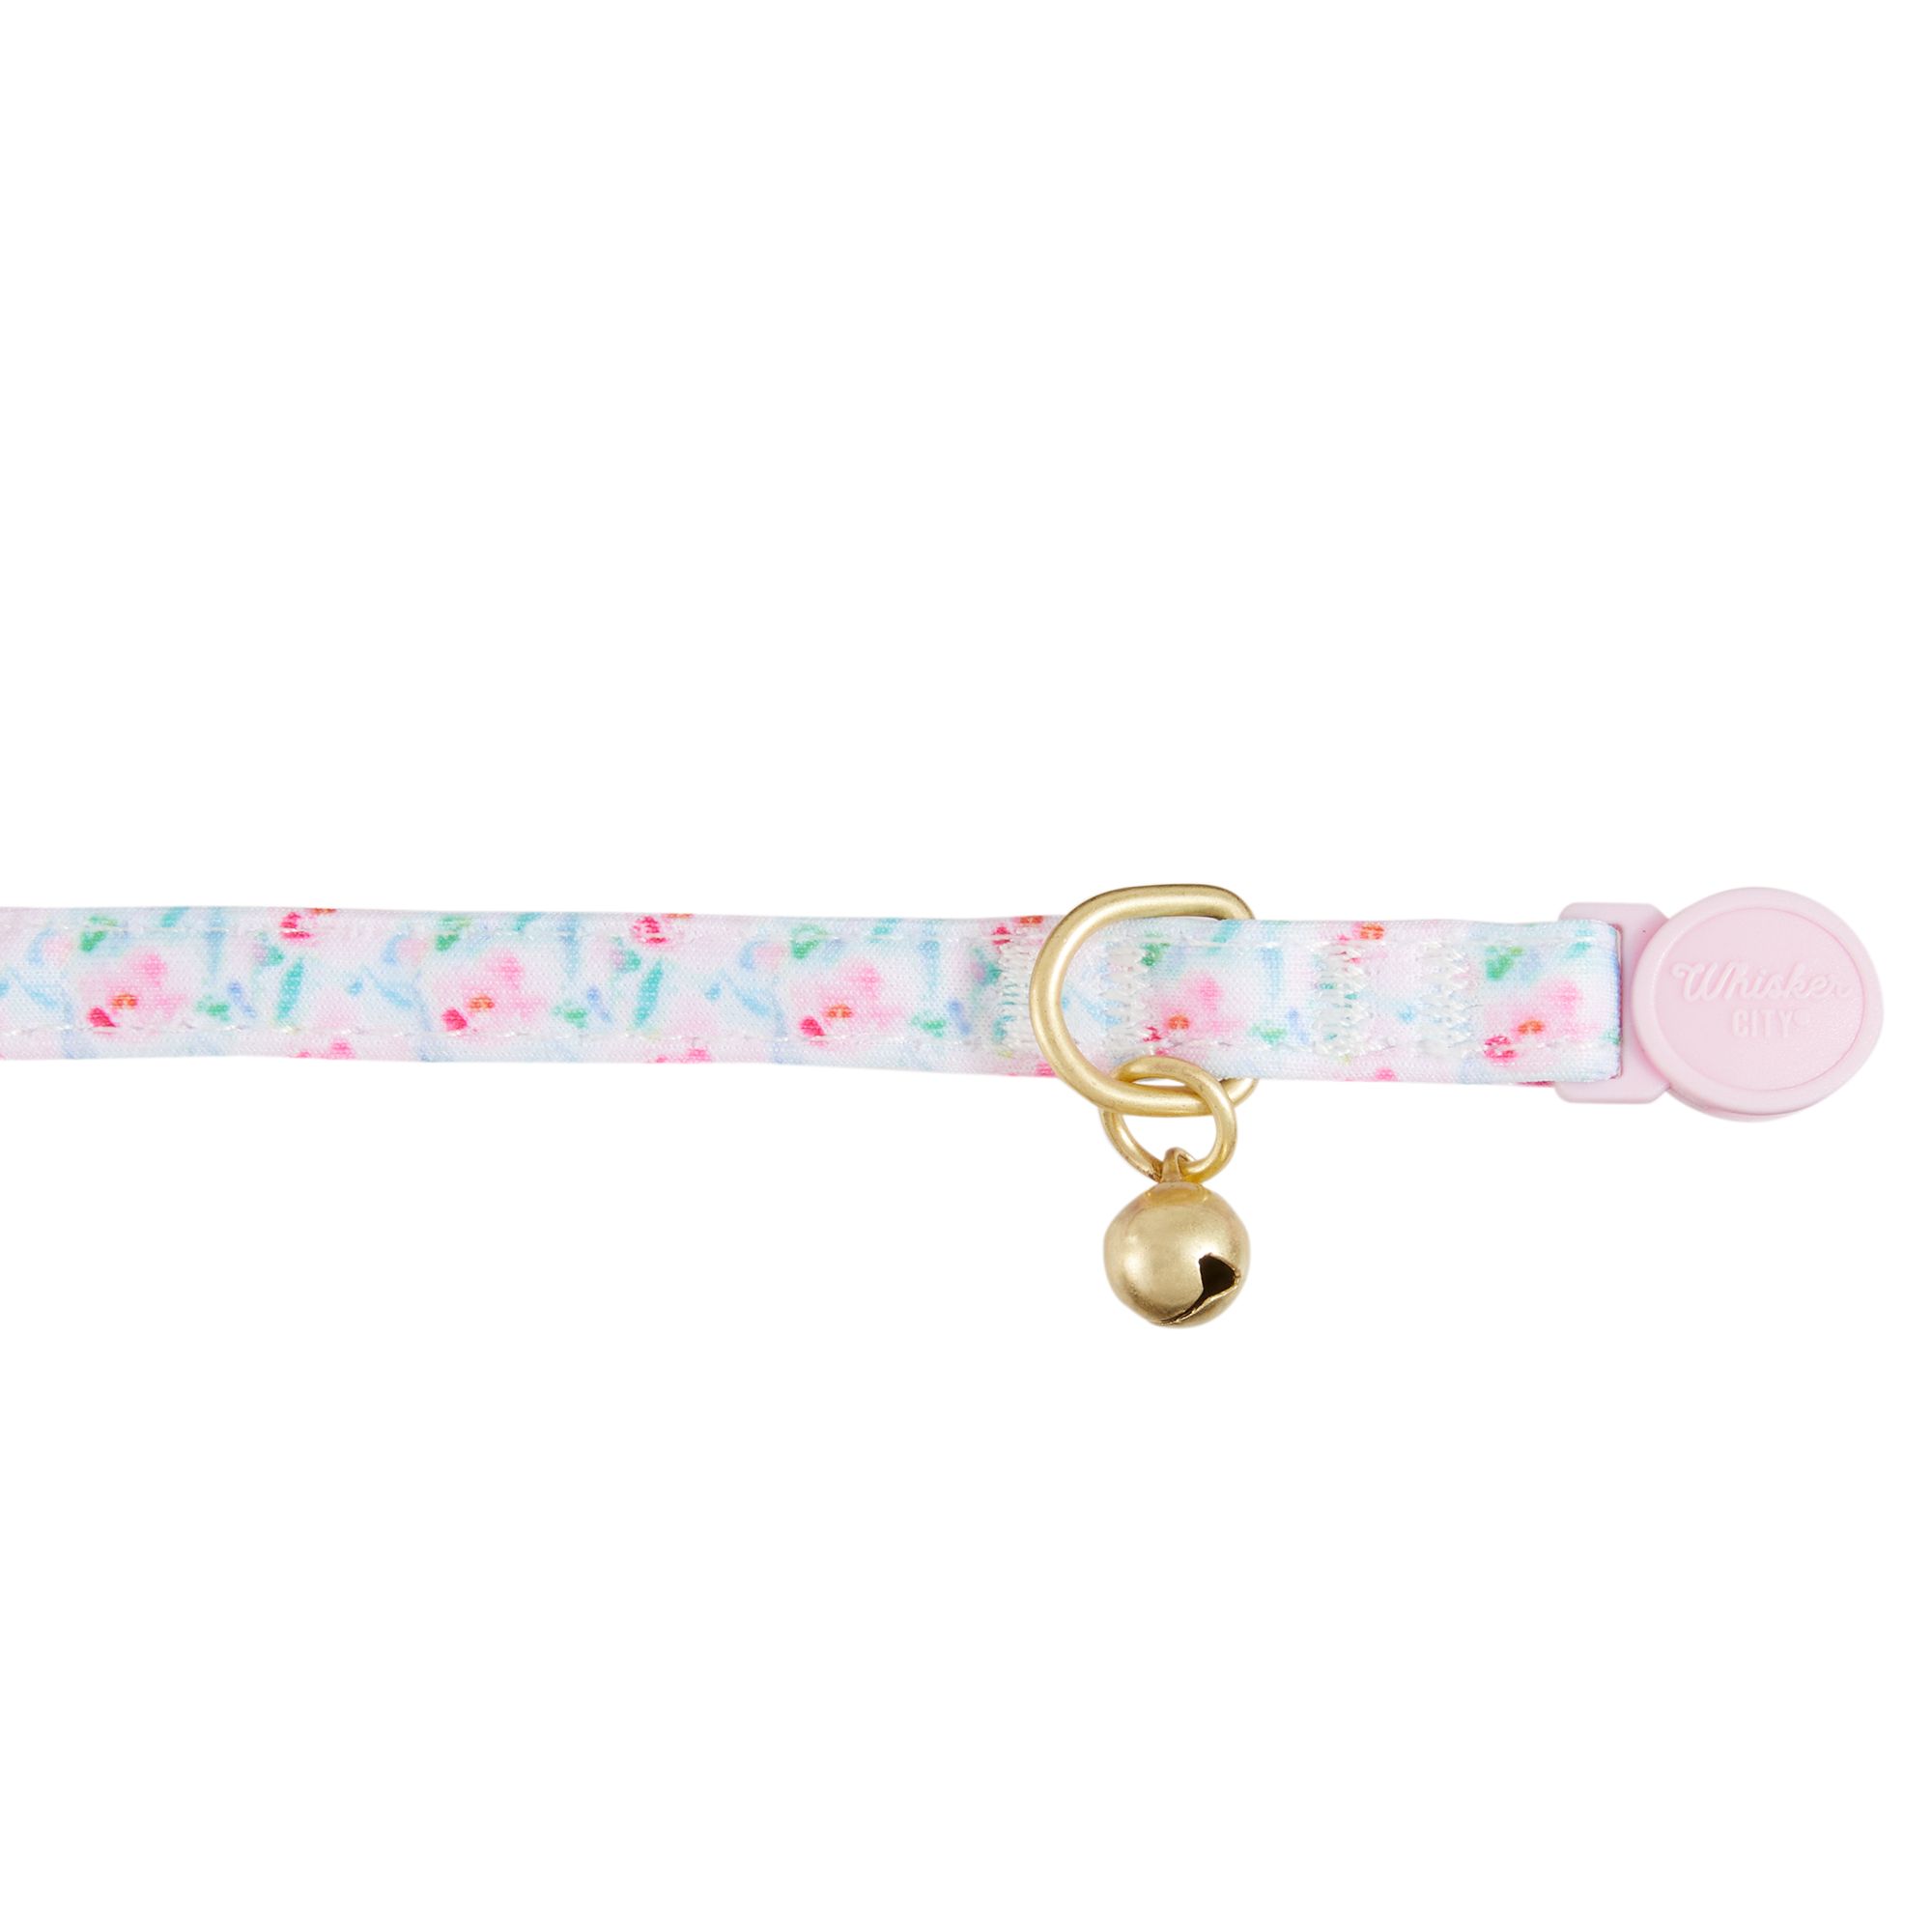 Floral Cat Collar and Bowgirl Kitten Collar Leash Set 